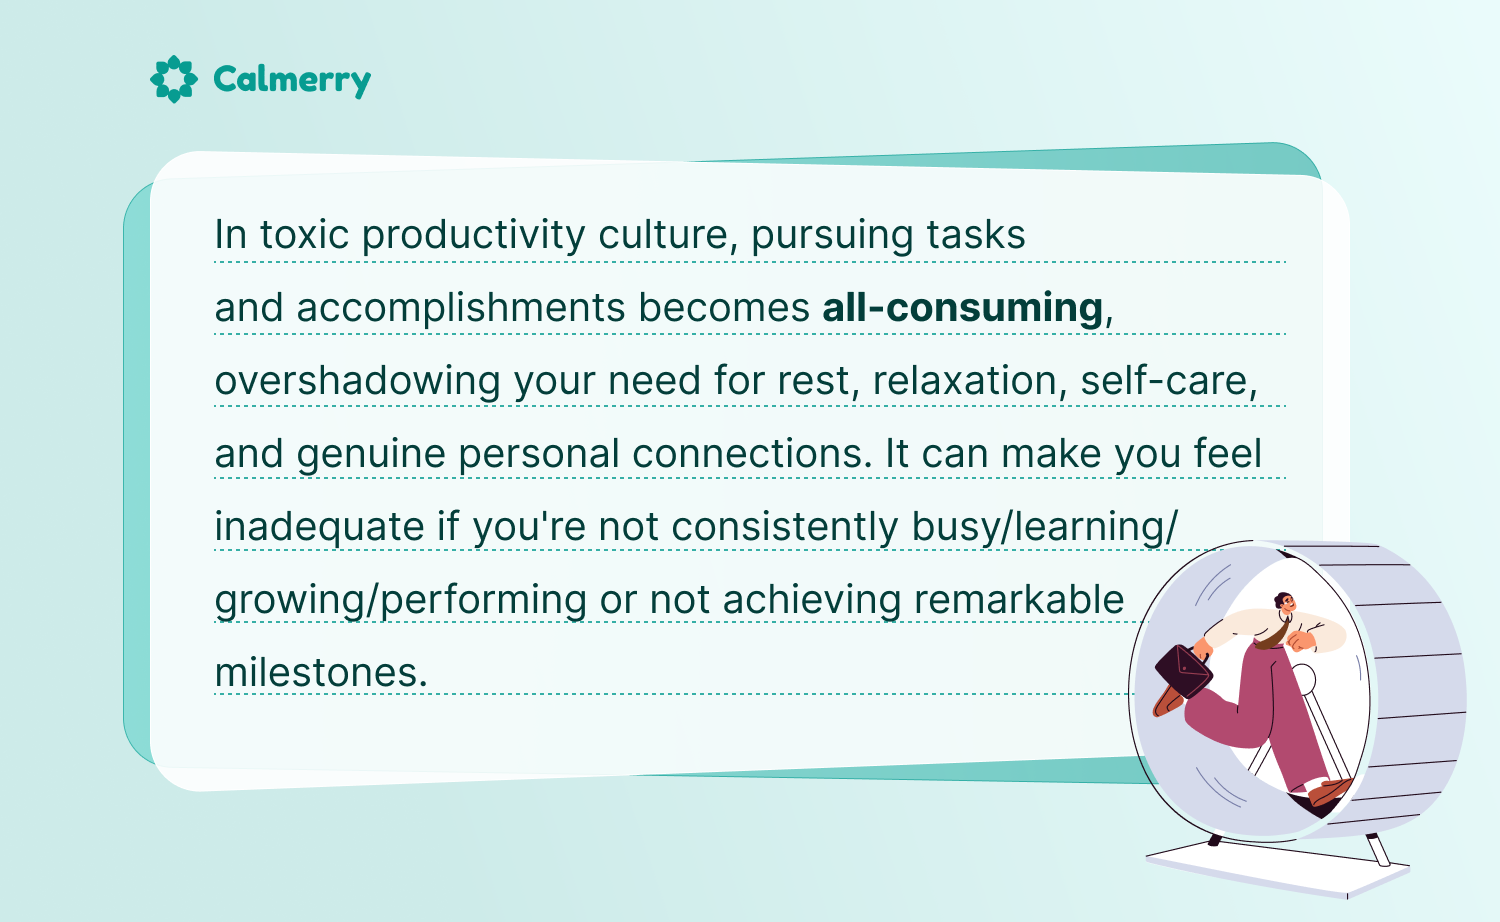 In a toxic productivity culture, pursuing tasks and accomplishments becomes all-consuming, overshadowing your need for rest, relaxation, self-care, and genuine personal connections. It can make you feel inadequate if you're not consistently busy/learning/growing/performing or not achieving remarkable milestones.